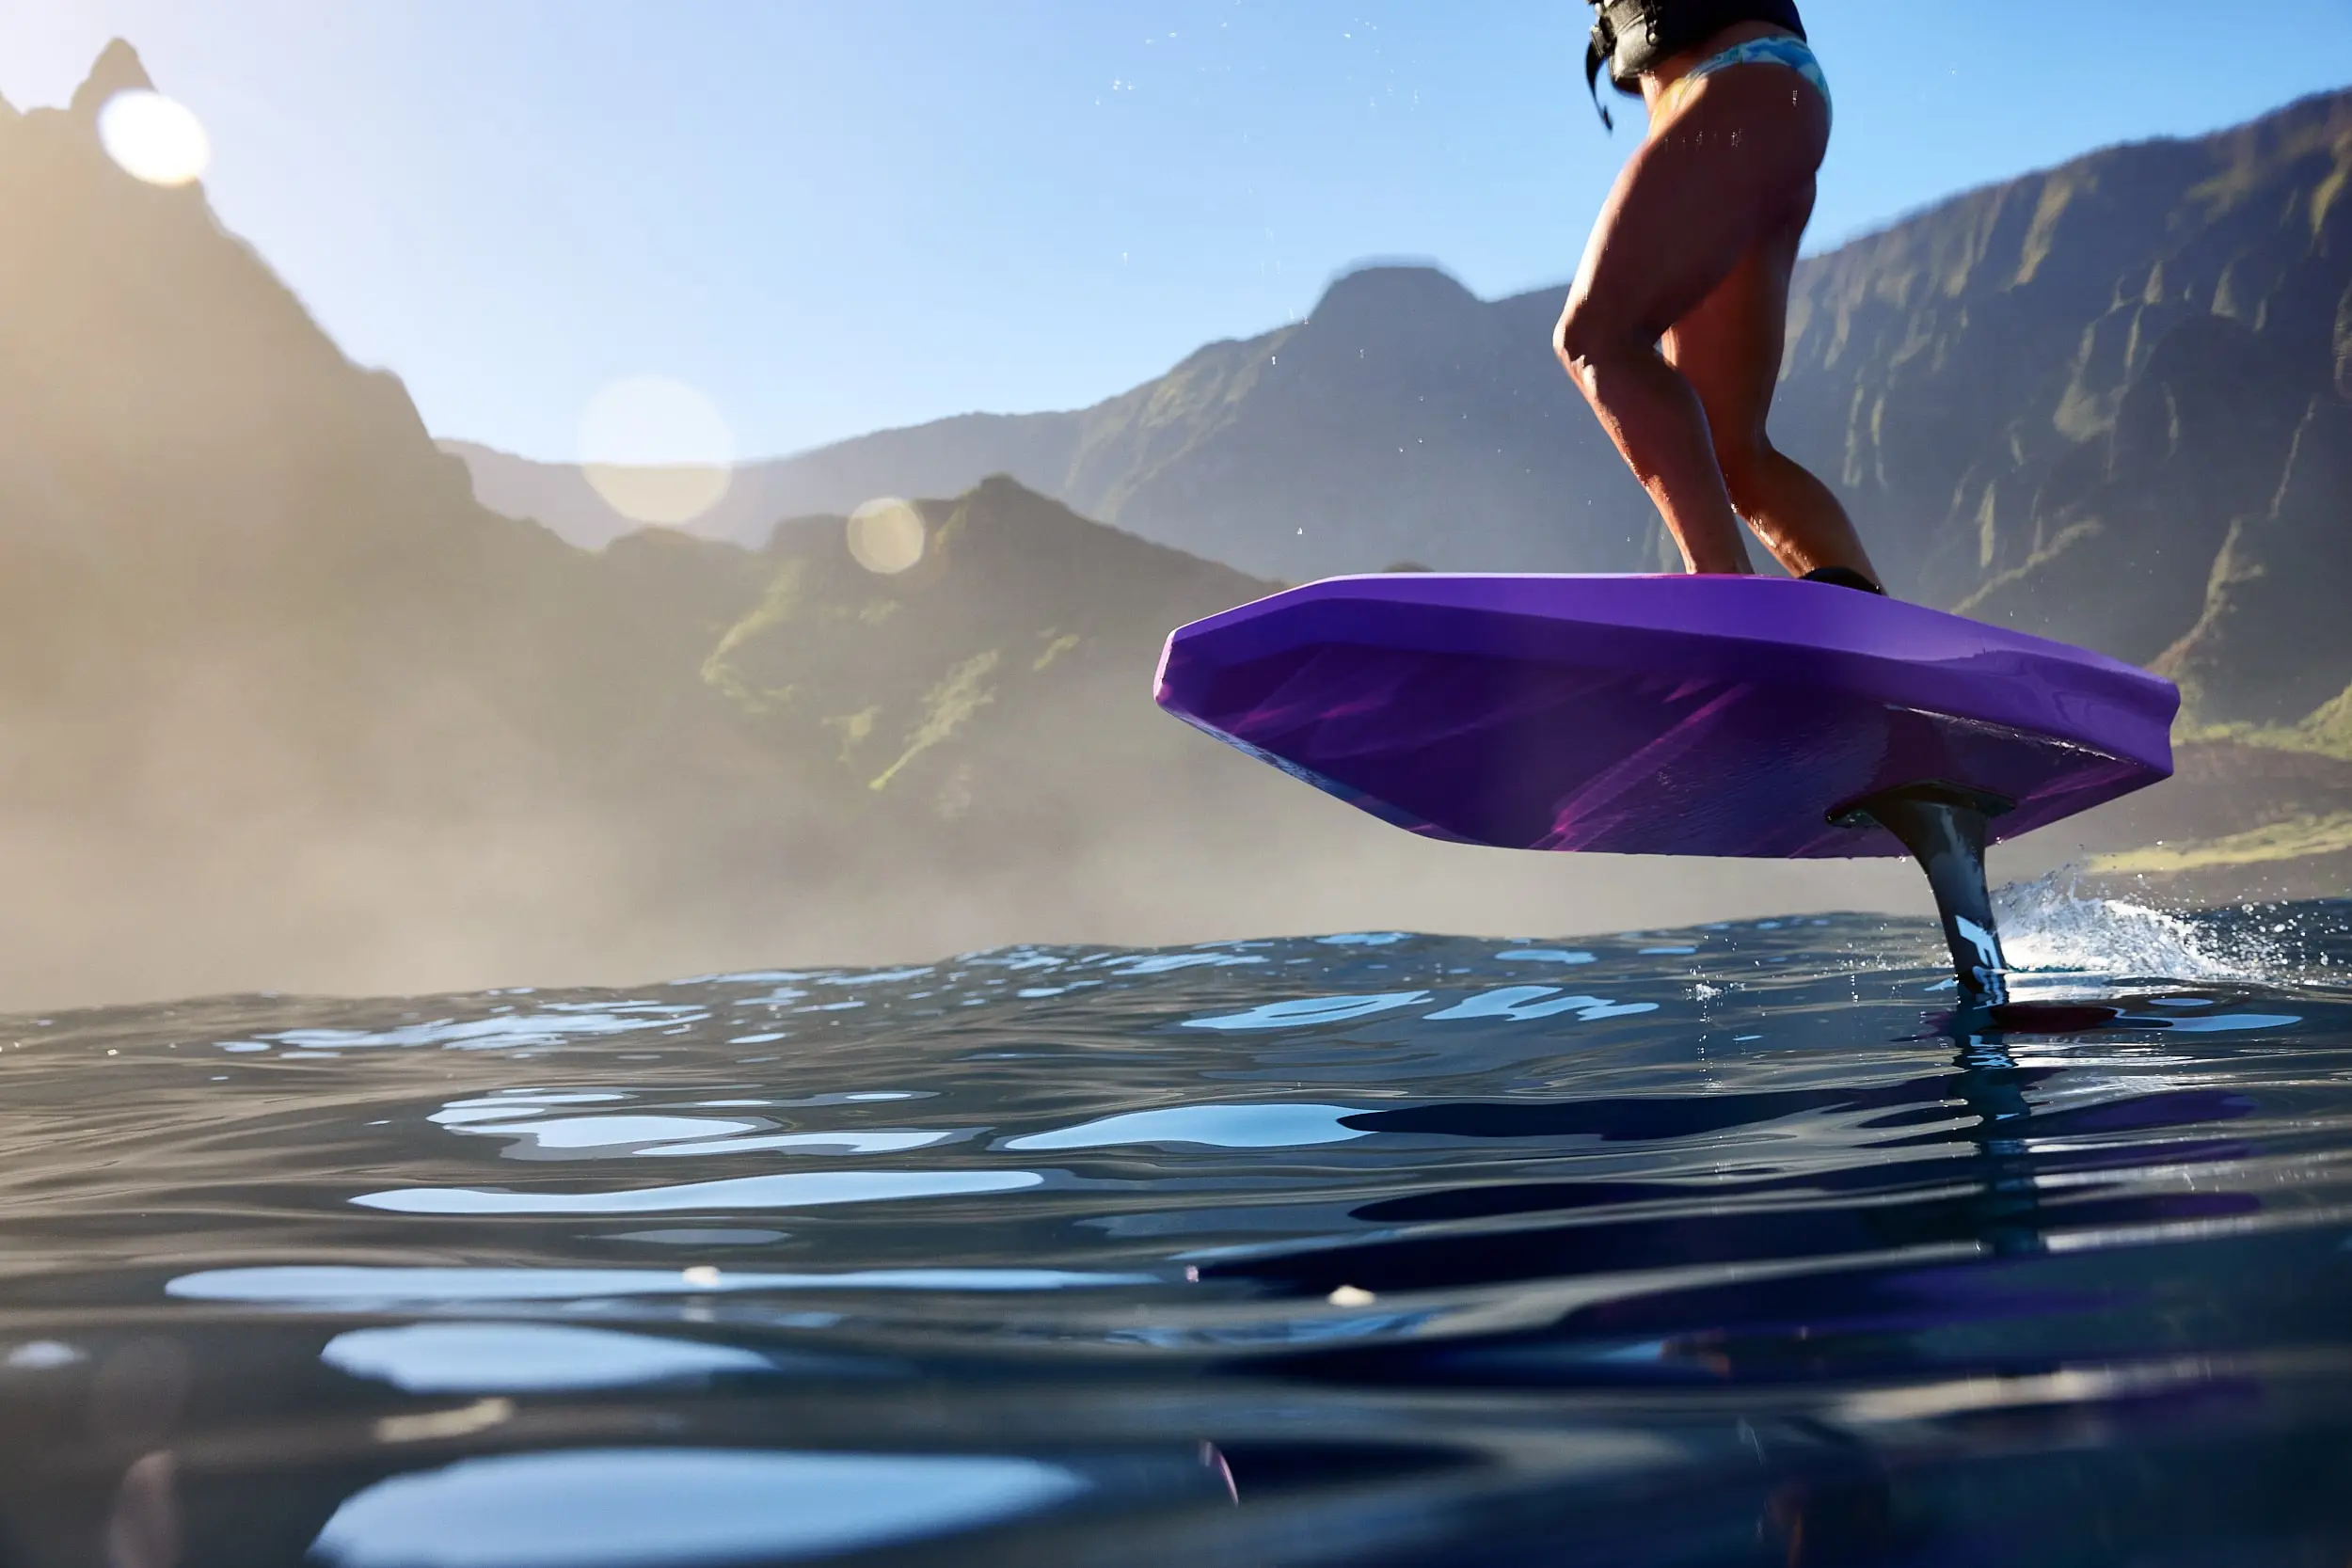 An image of a rider carving on the original FOIL model. The rider is carving in calm waters. The image is taken from the surface of the water, looking up at the rider. Mountains are pictured in the background.